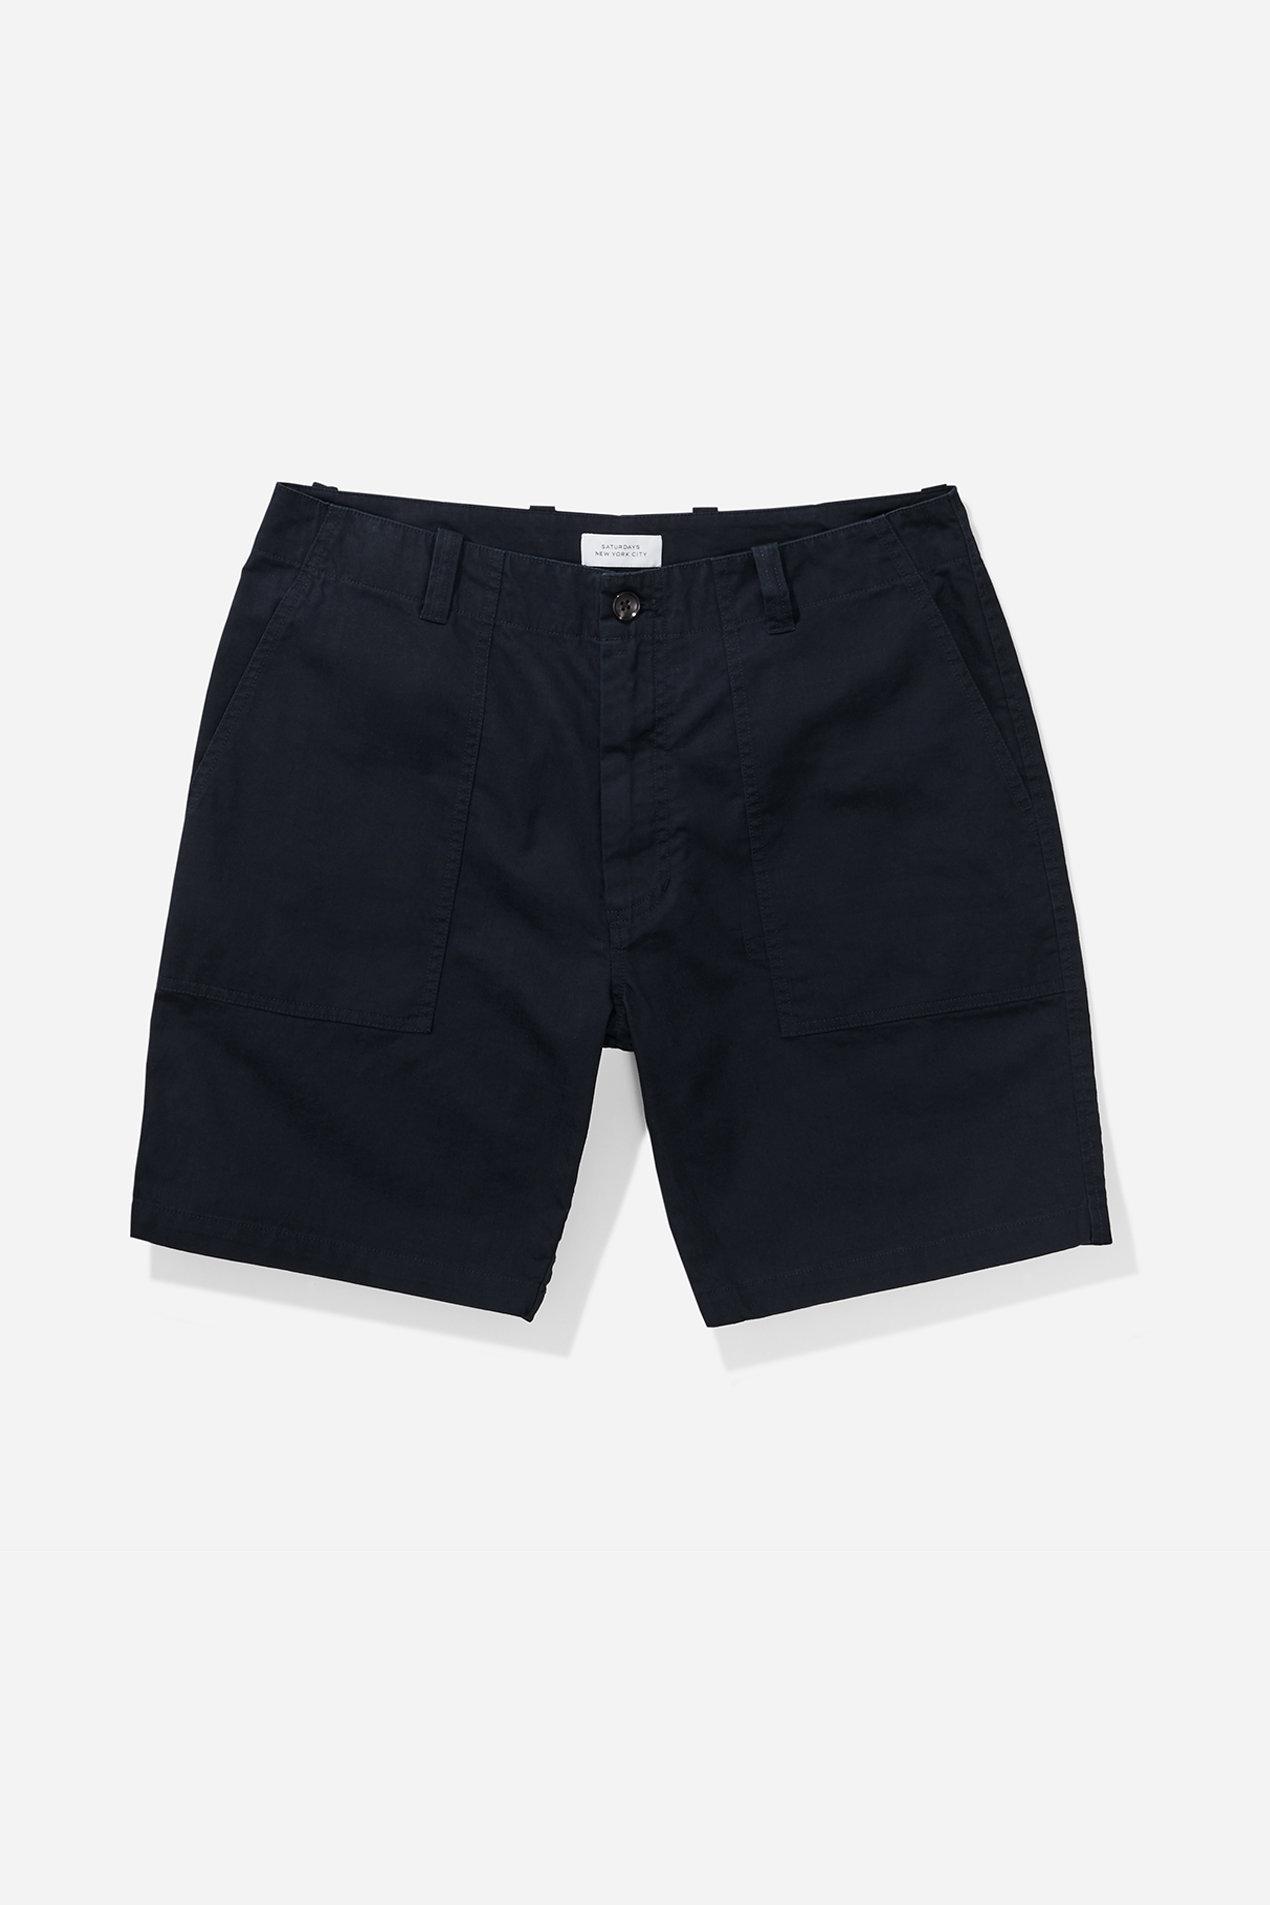 Lyst - Saturdays Nyc Evan Shorts in Blue for Men